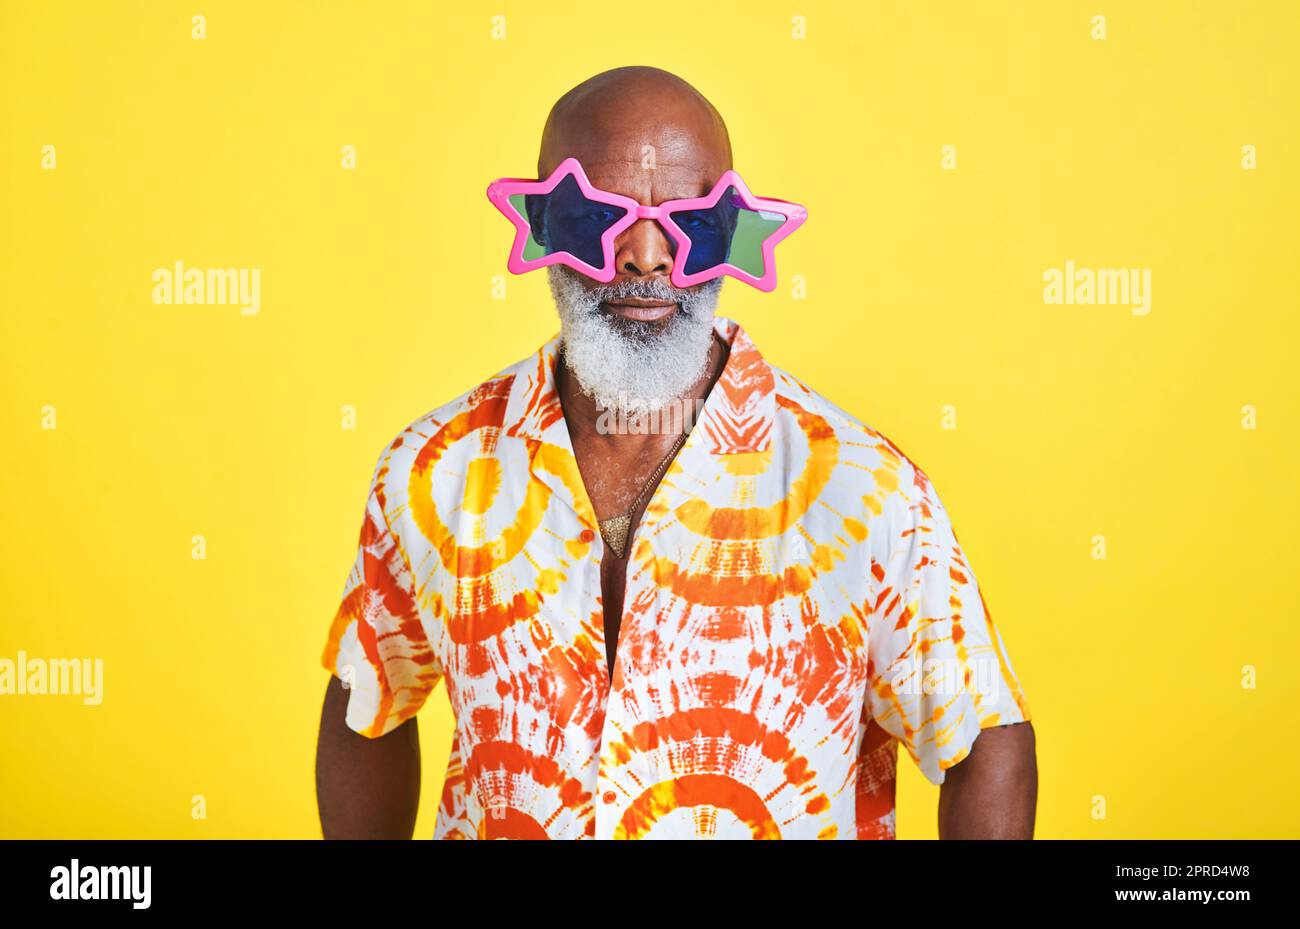 Im always the star attraction. Portrait of a funky and stylish senior man wearing sunglasses posing in studio against a yellow background. Stock Photo